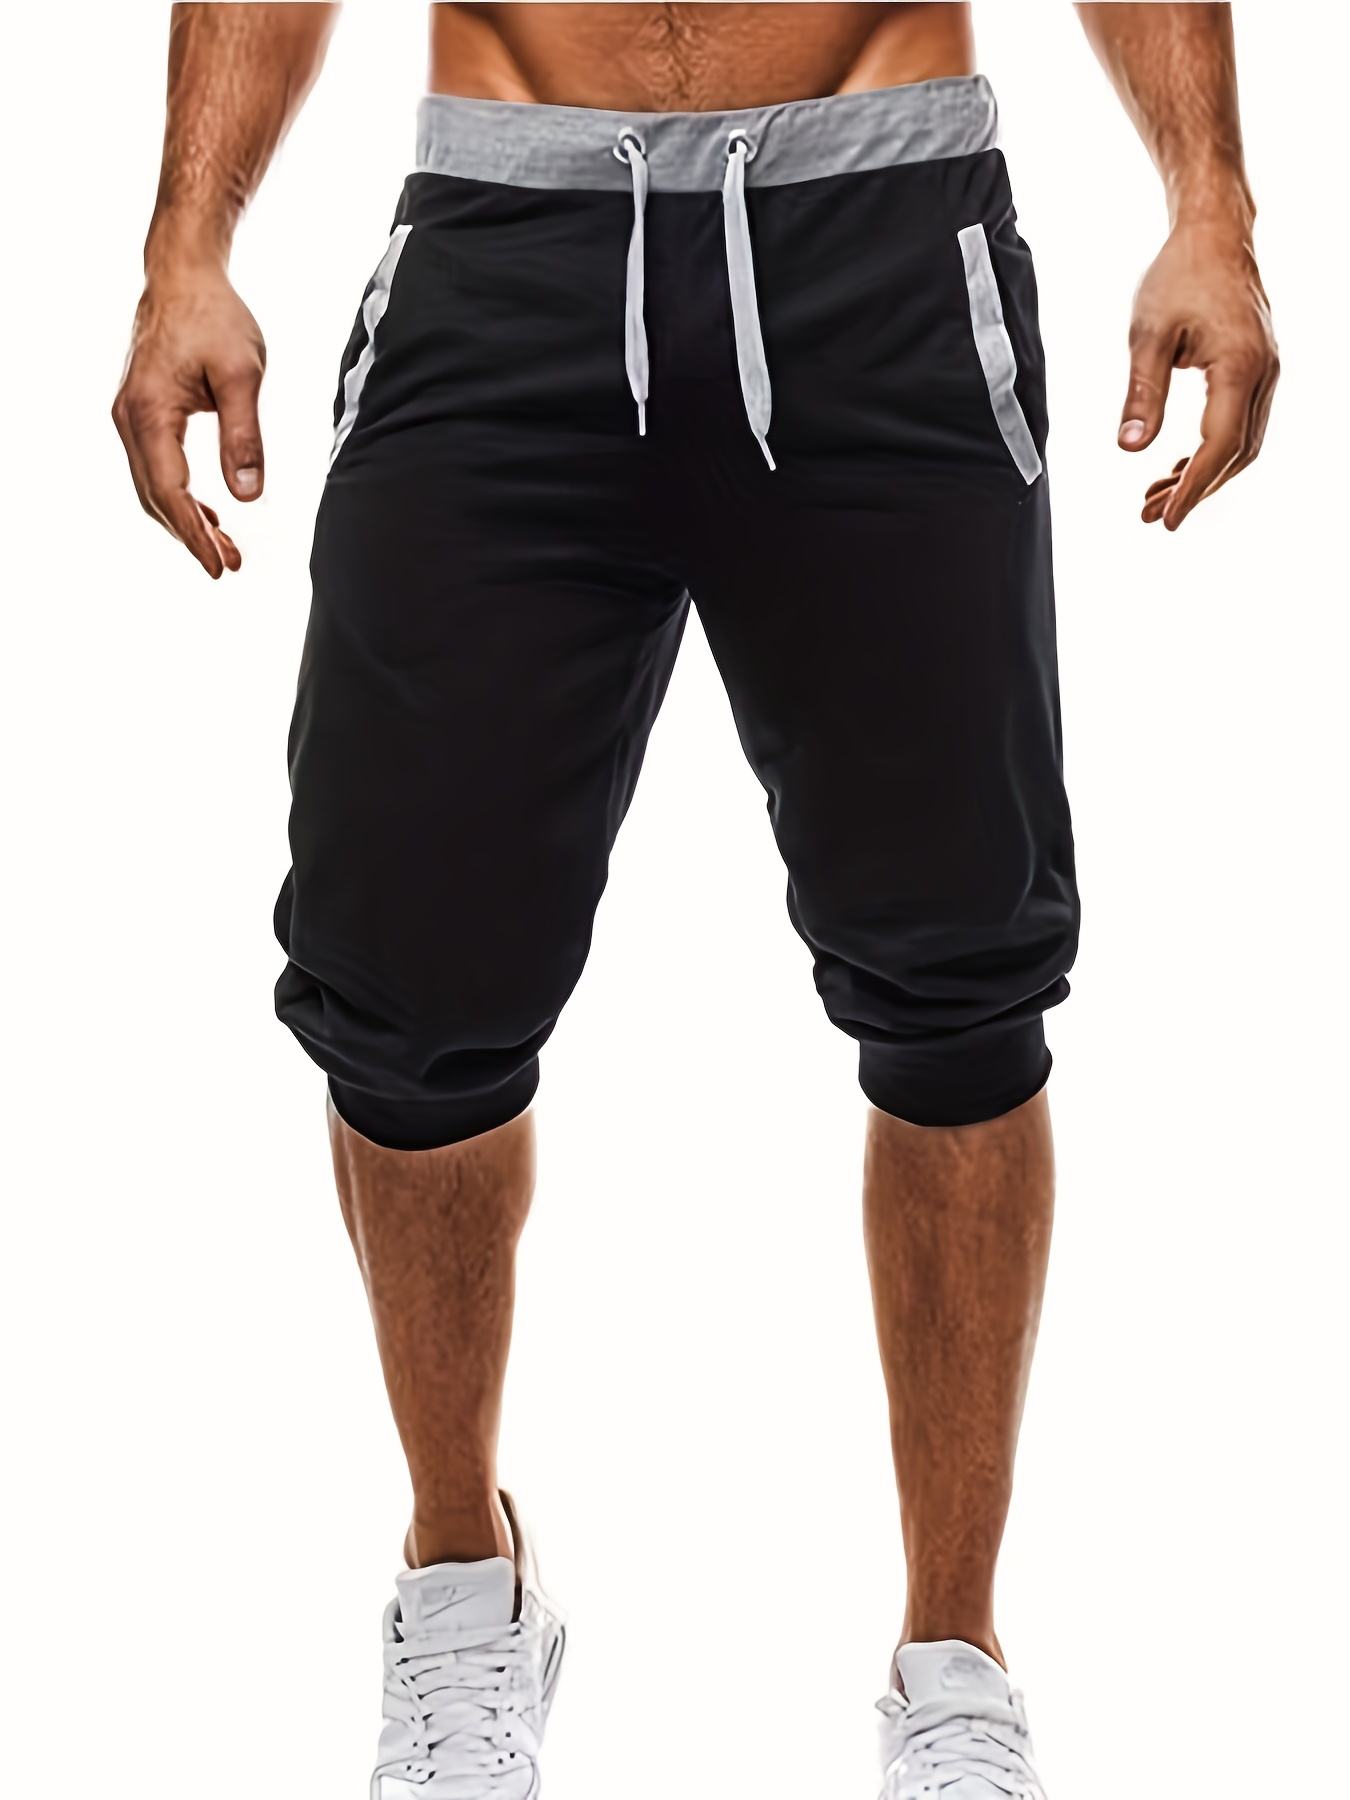 Breathable Mens Cotton Jogger Capri Mens Jogger Shorts With Three Pockets  Casual 3/4 Below Knee Style MX200324 From Tubi02, $12.23